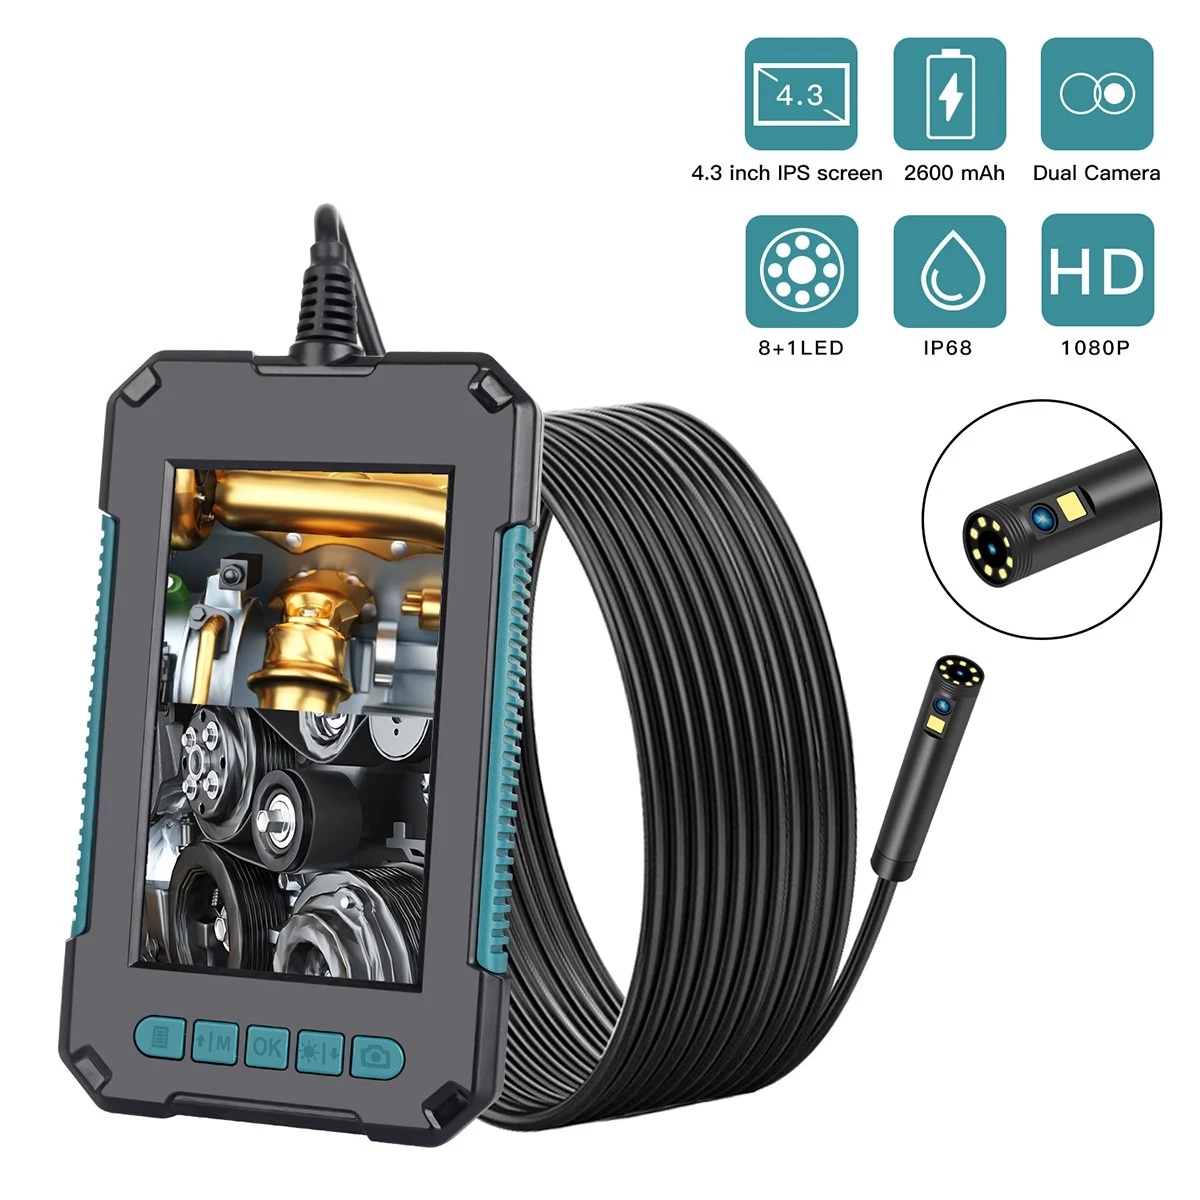 Handheld-Borescope-43-Inches-IPS-Screen-1080P-High-Definition-IP68-Industrial-Borescope-with-9-LEDs--1757754-8